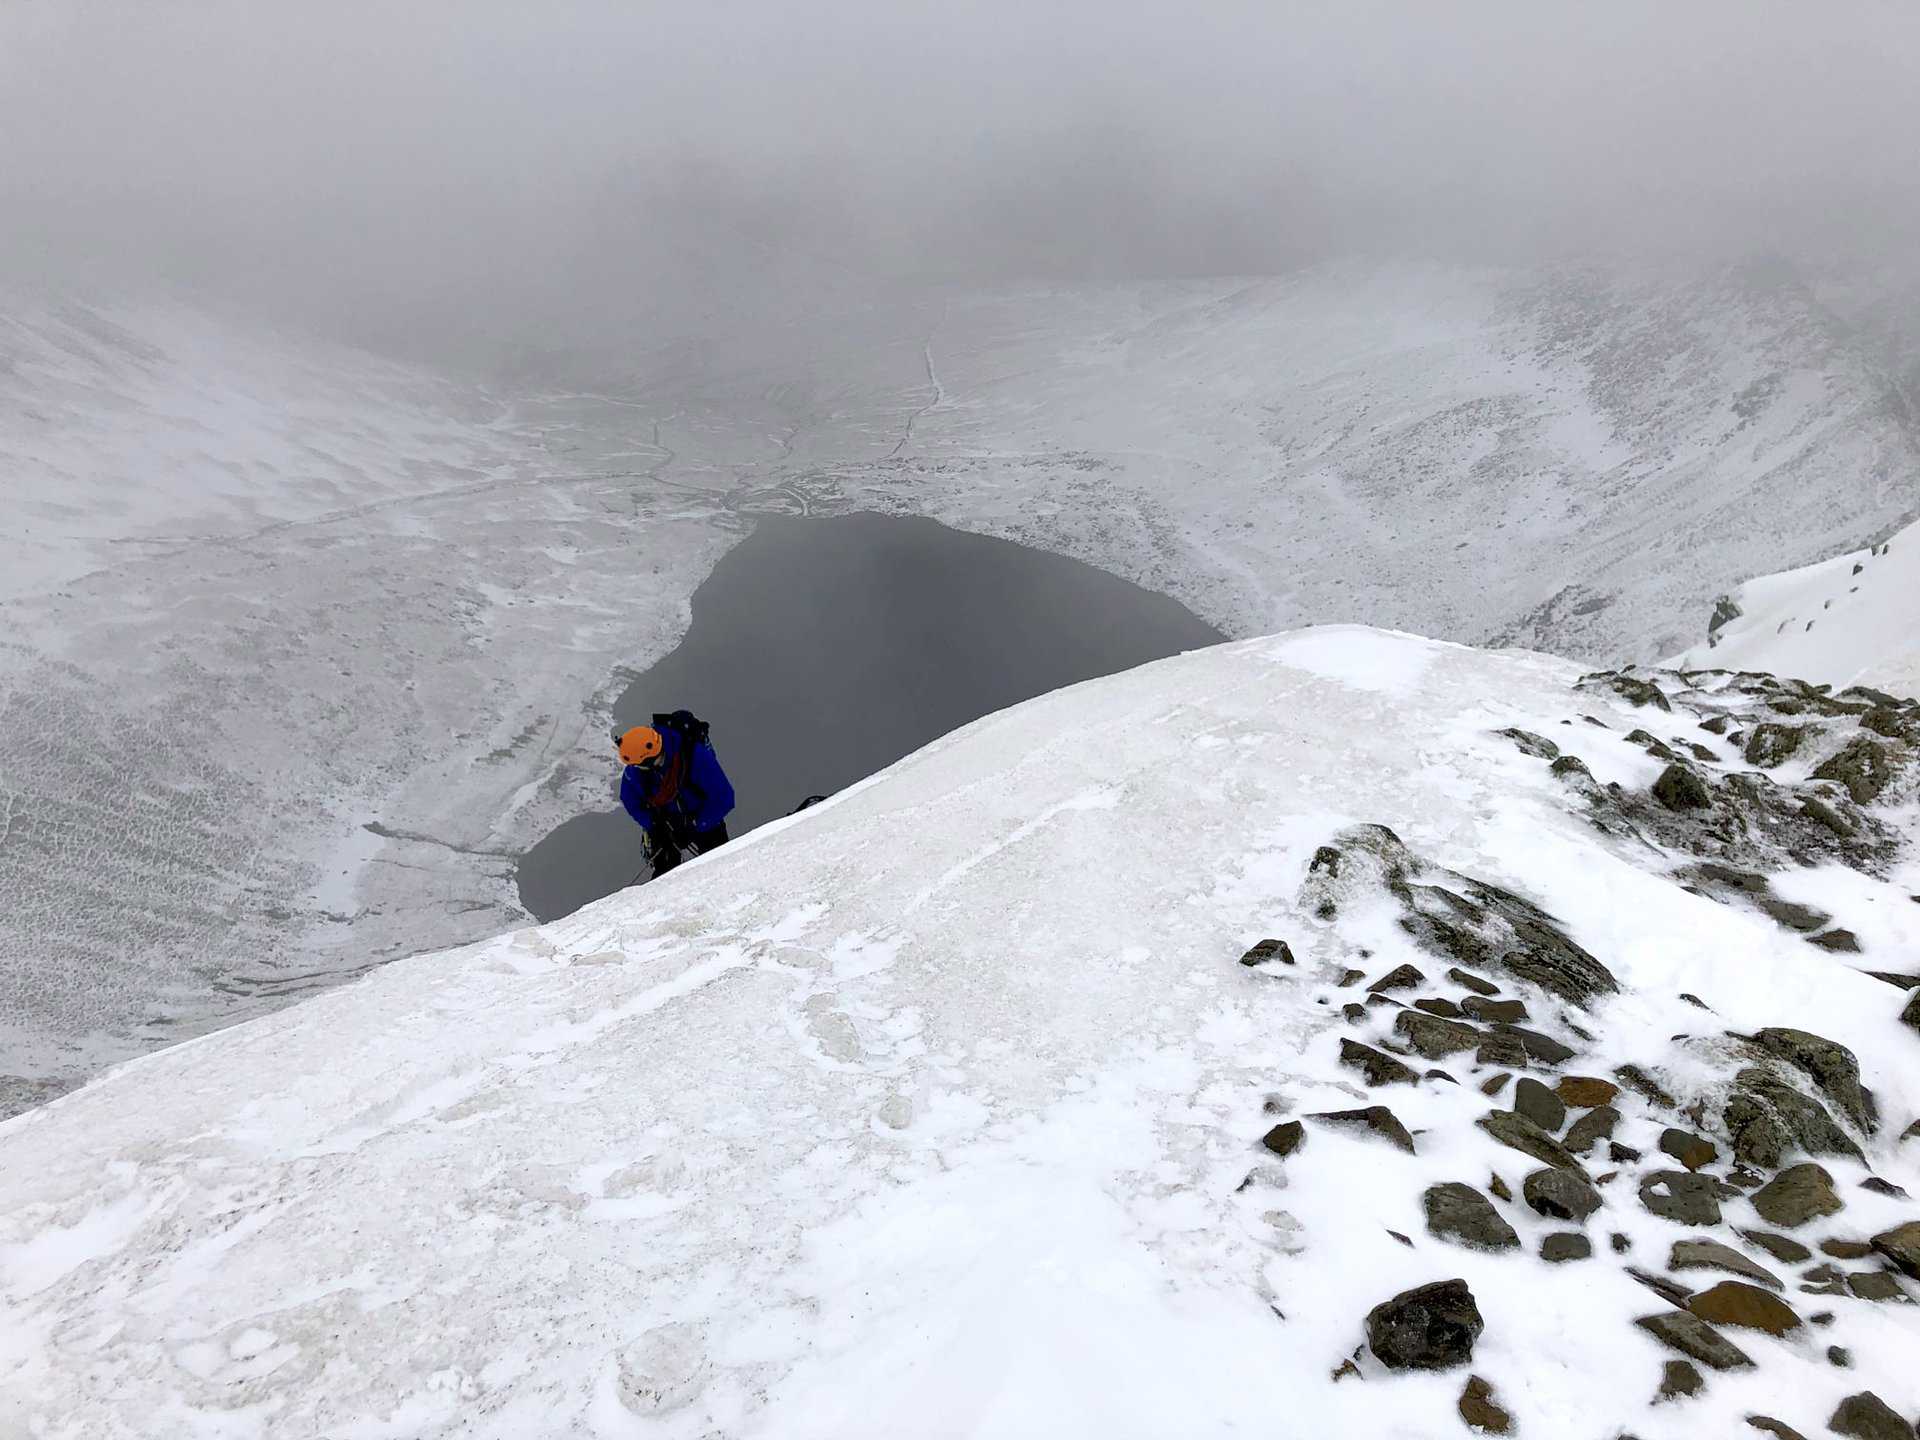 A climber's determination near Helvellyn’s peak, a poignant moment on the Helvellyn walk from Glenridding.